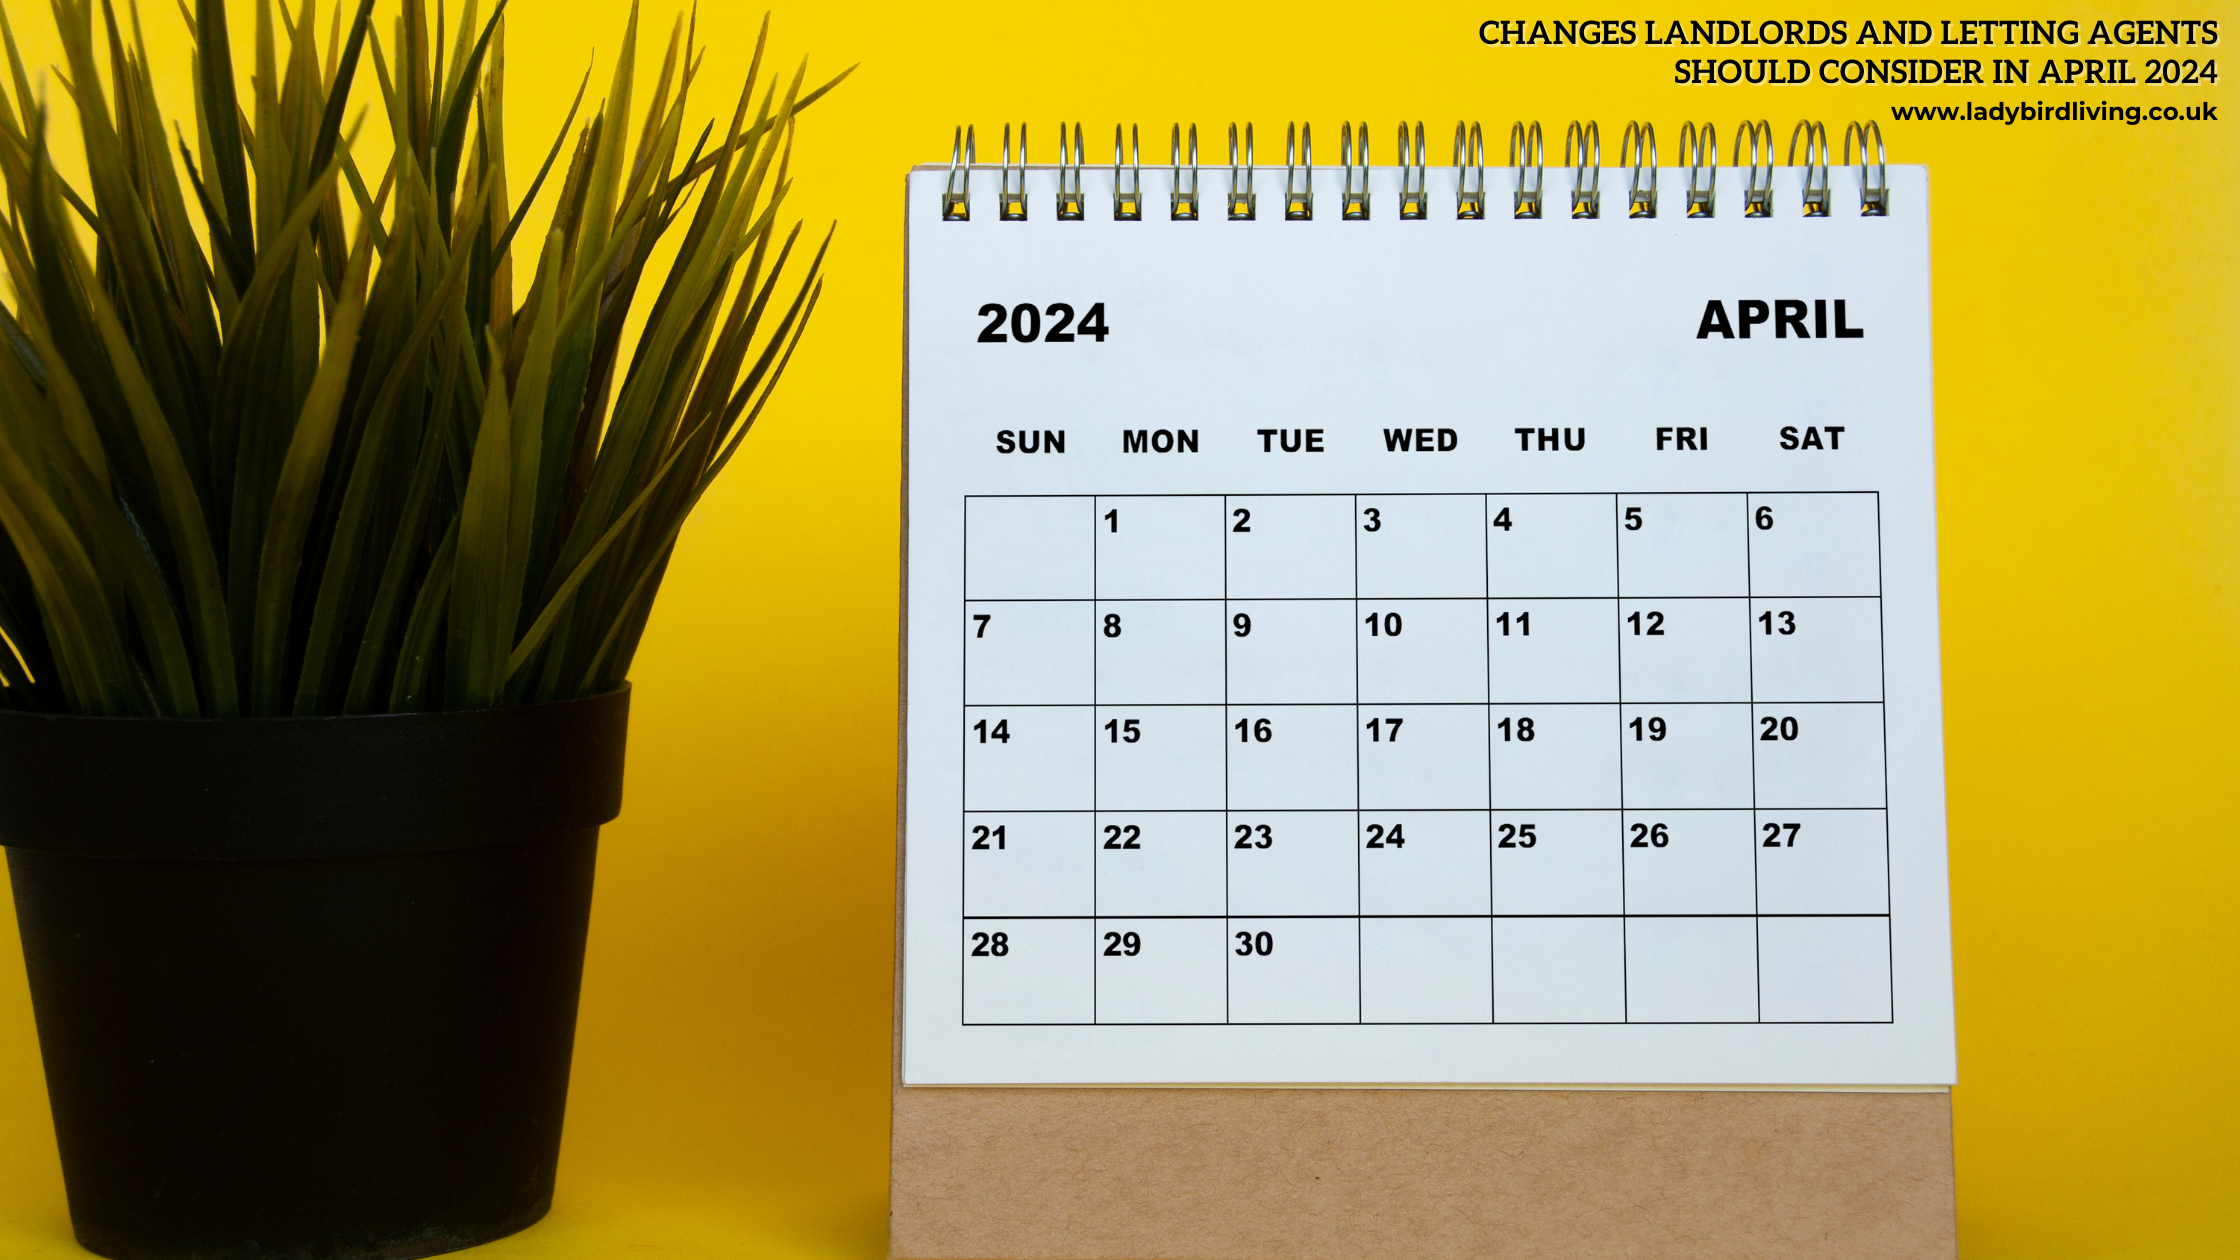 Changes landlords and letting agents should consider in April 2024